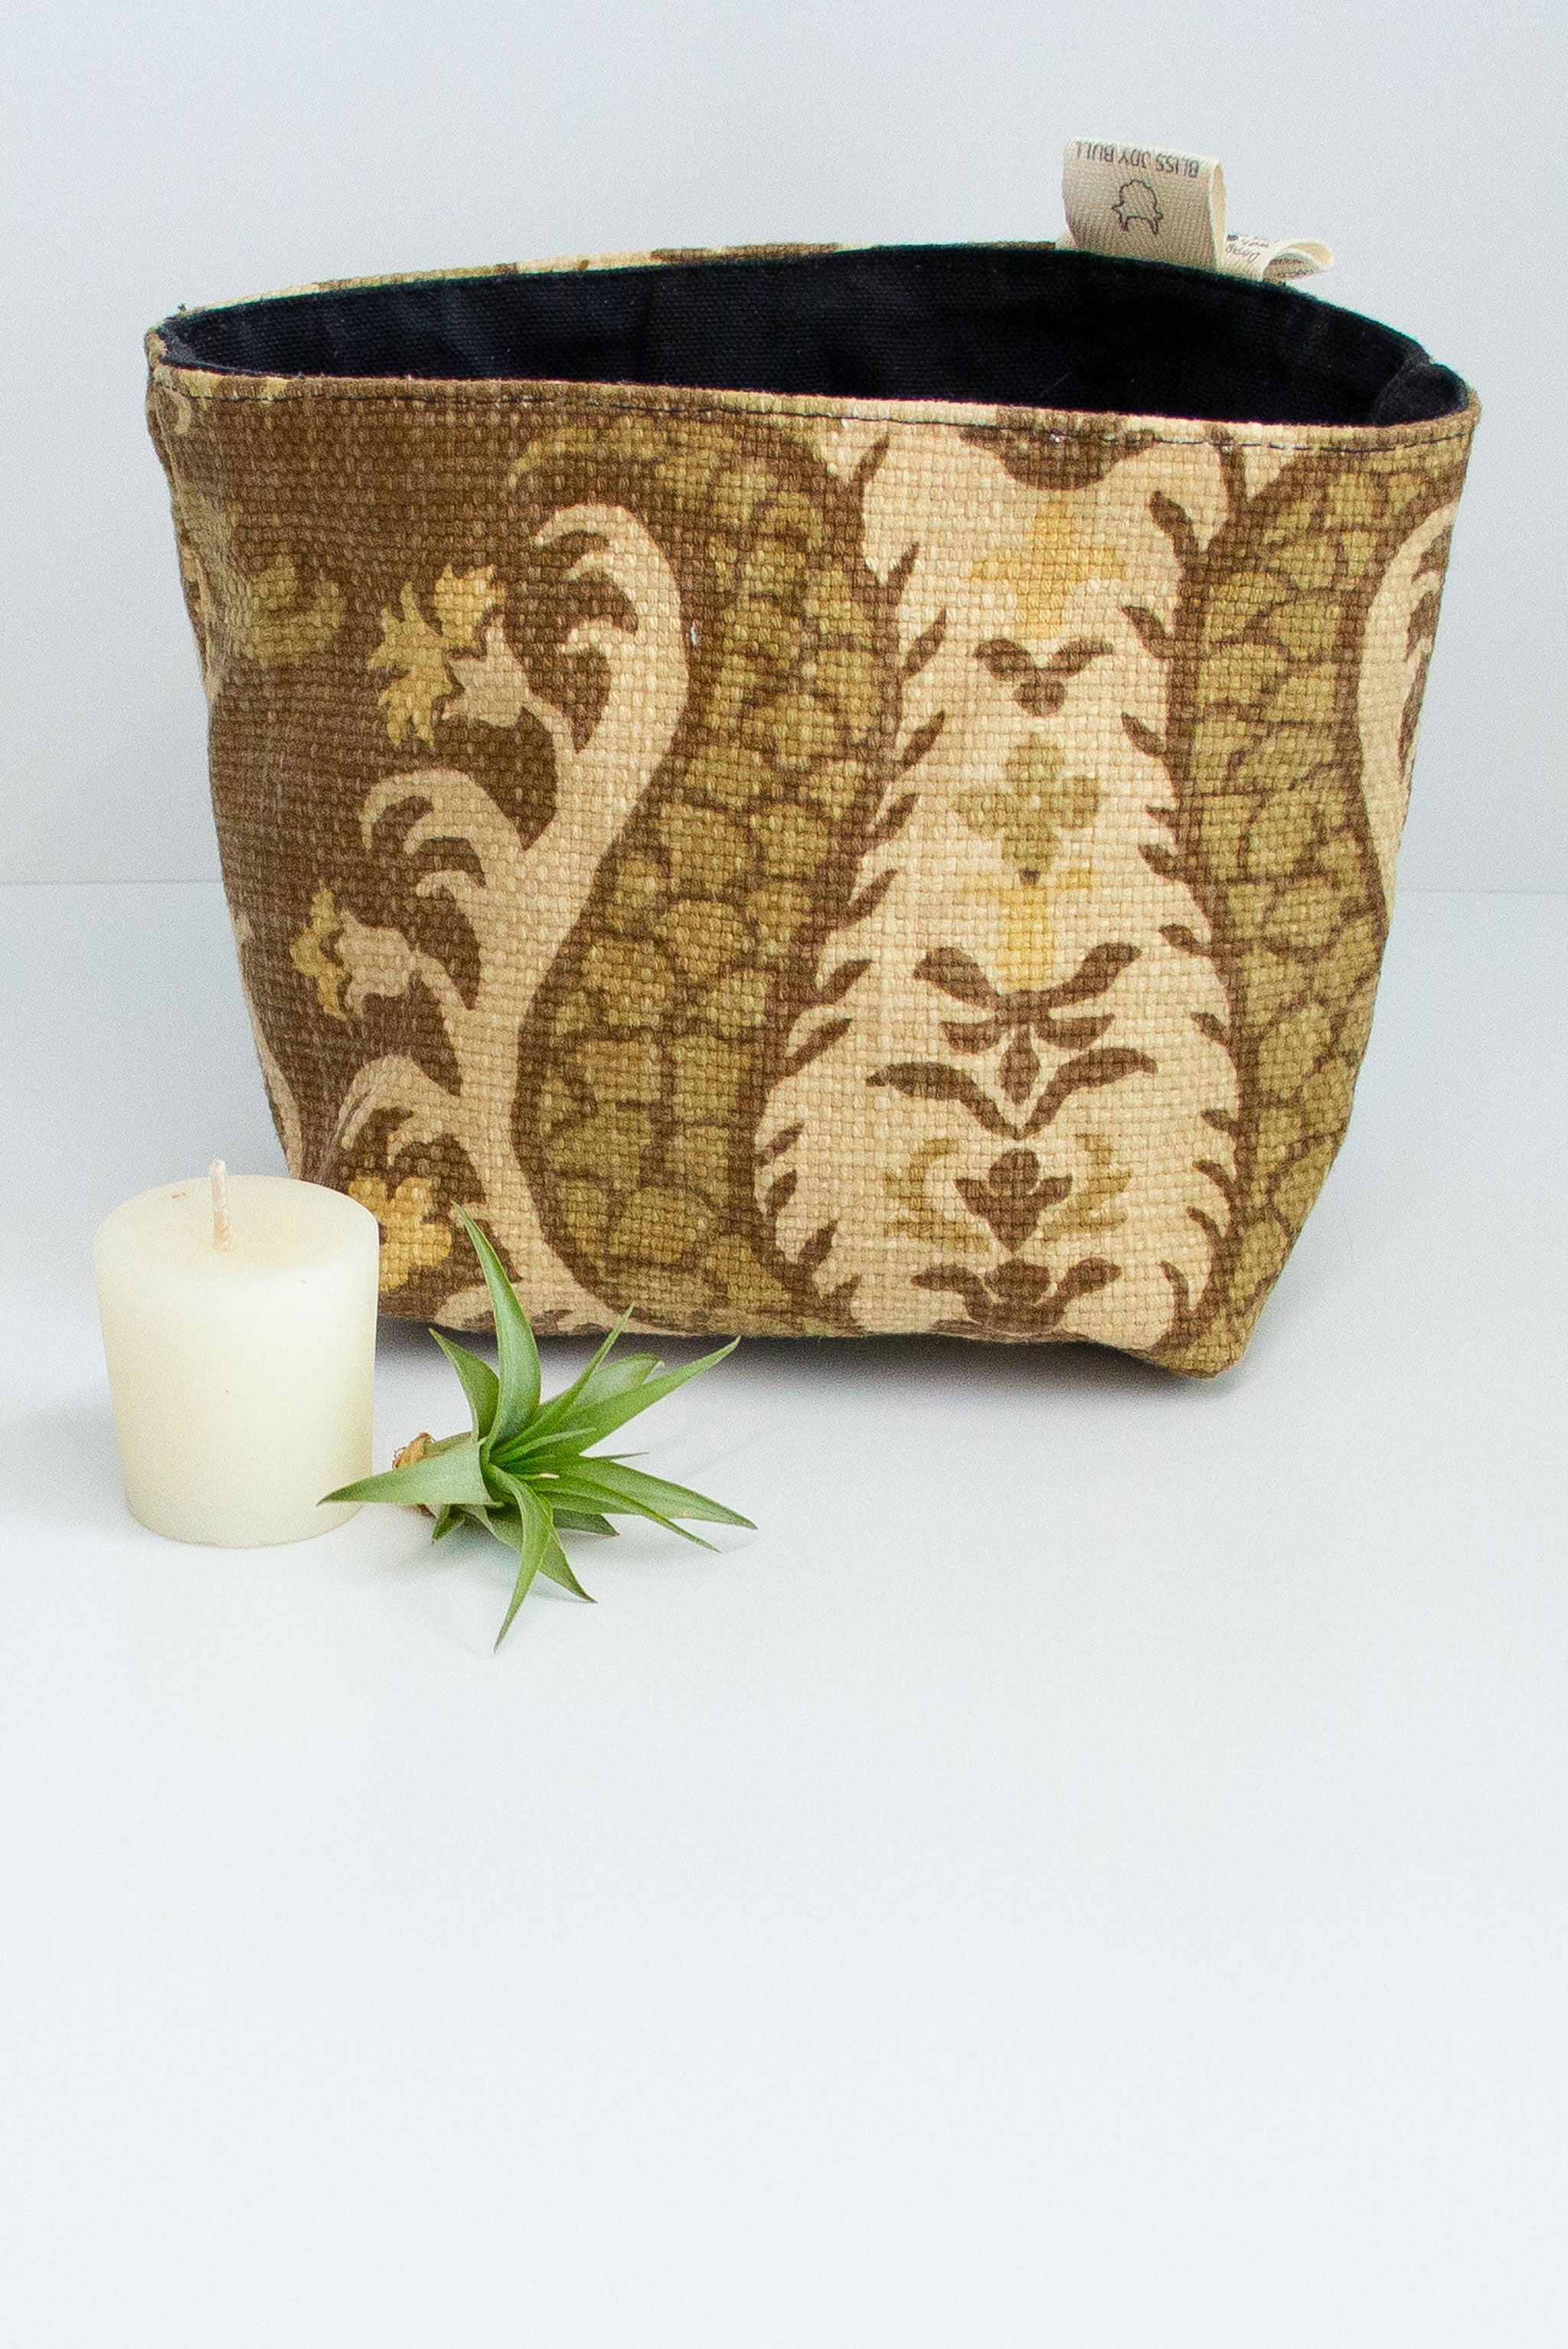 A fabric basket in light yellow and dark olive fleur de lis pattern with a black lining. A small votive candle and air plant sit next to it on a white background. 